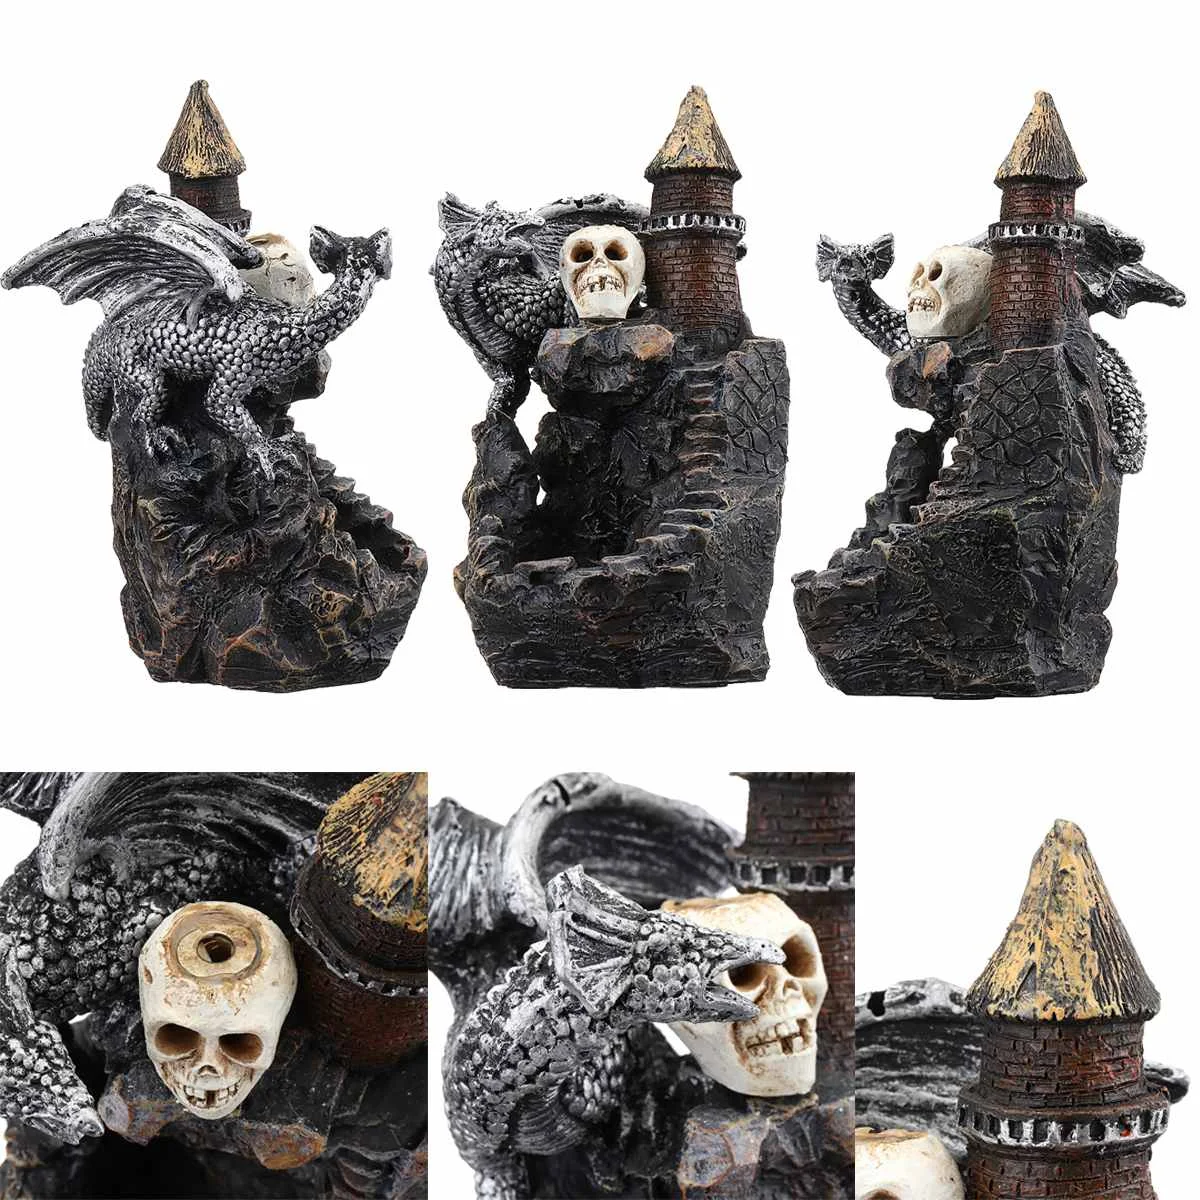 

Dragon Incense Burner Holder with Cones Backflow Cone Censer Office Desk Home Decor Teahouse Ornaments Buddhist Art Crafts Gift